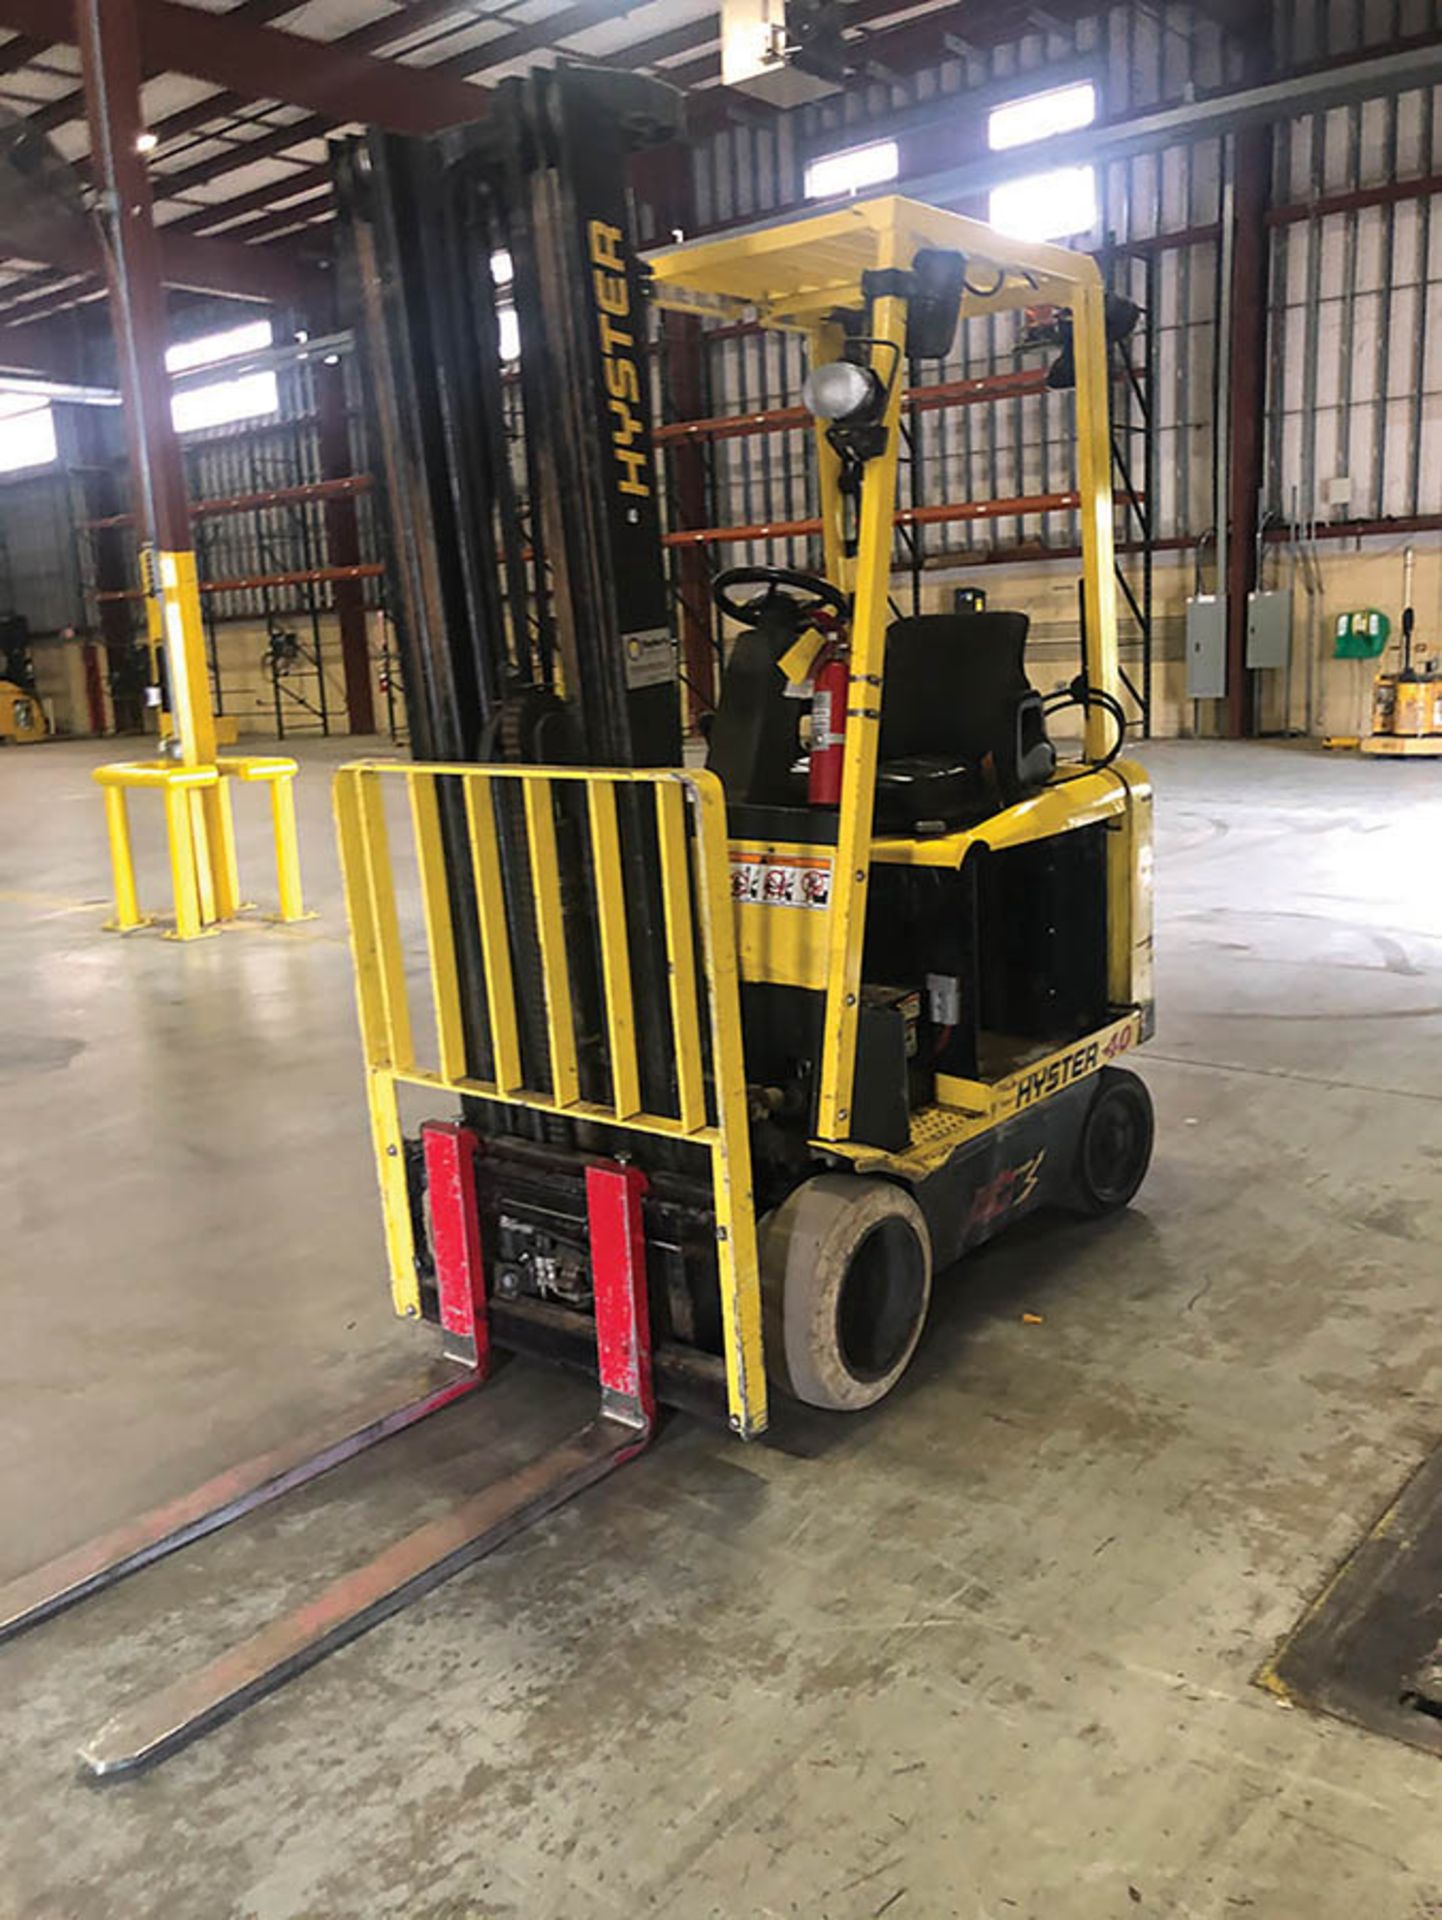 HYSTER ELECTRIC FORKLIFT, MODEL # E4025, S/N F114-02785H, 36 V, SIDE SHIFT, SOLID TIRES, THREE STAGE